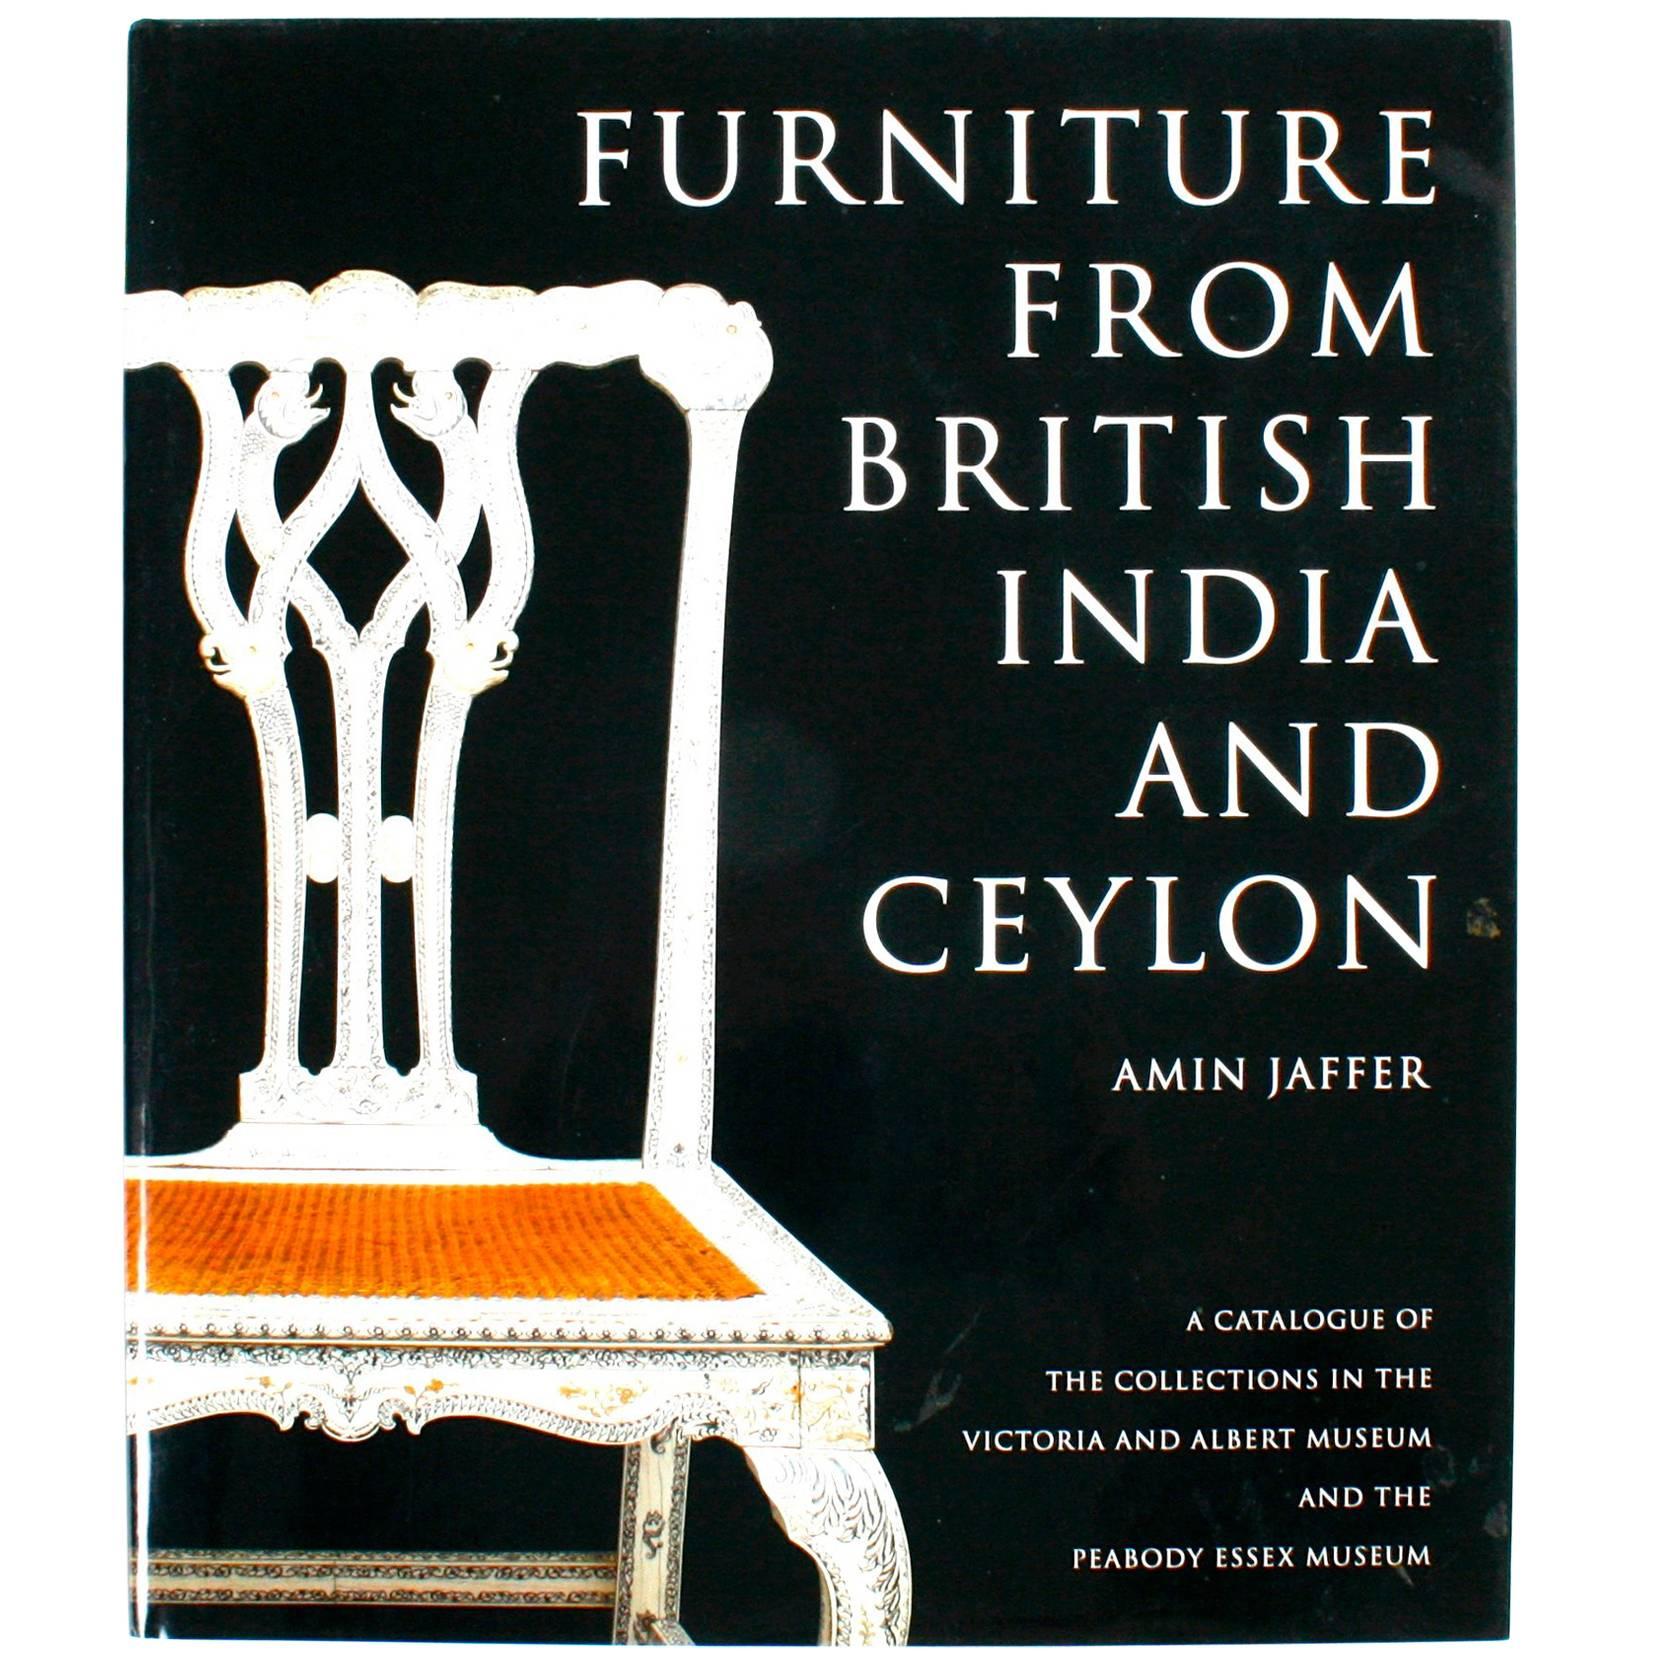 Furniture from British India and Ceylon by Amin Jaffer, First Edition